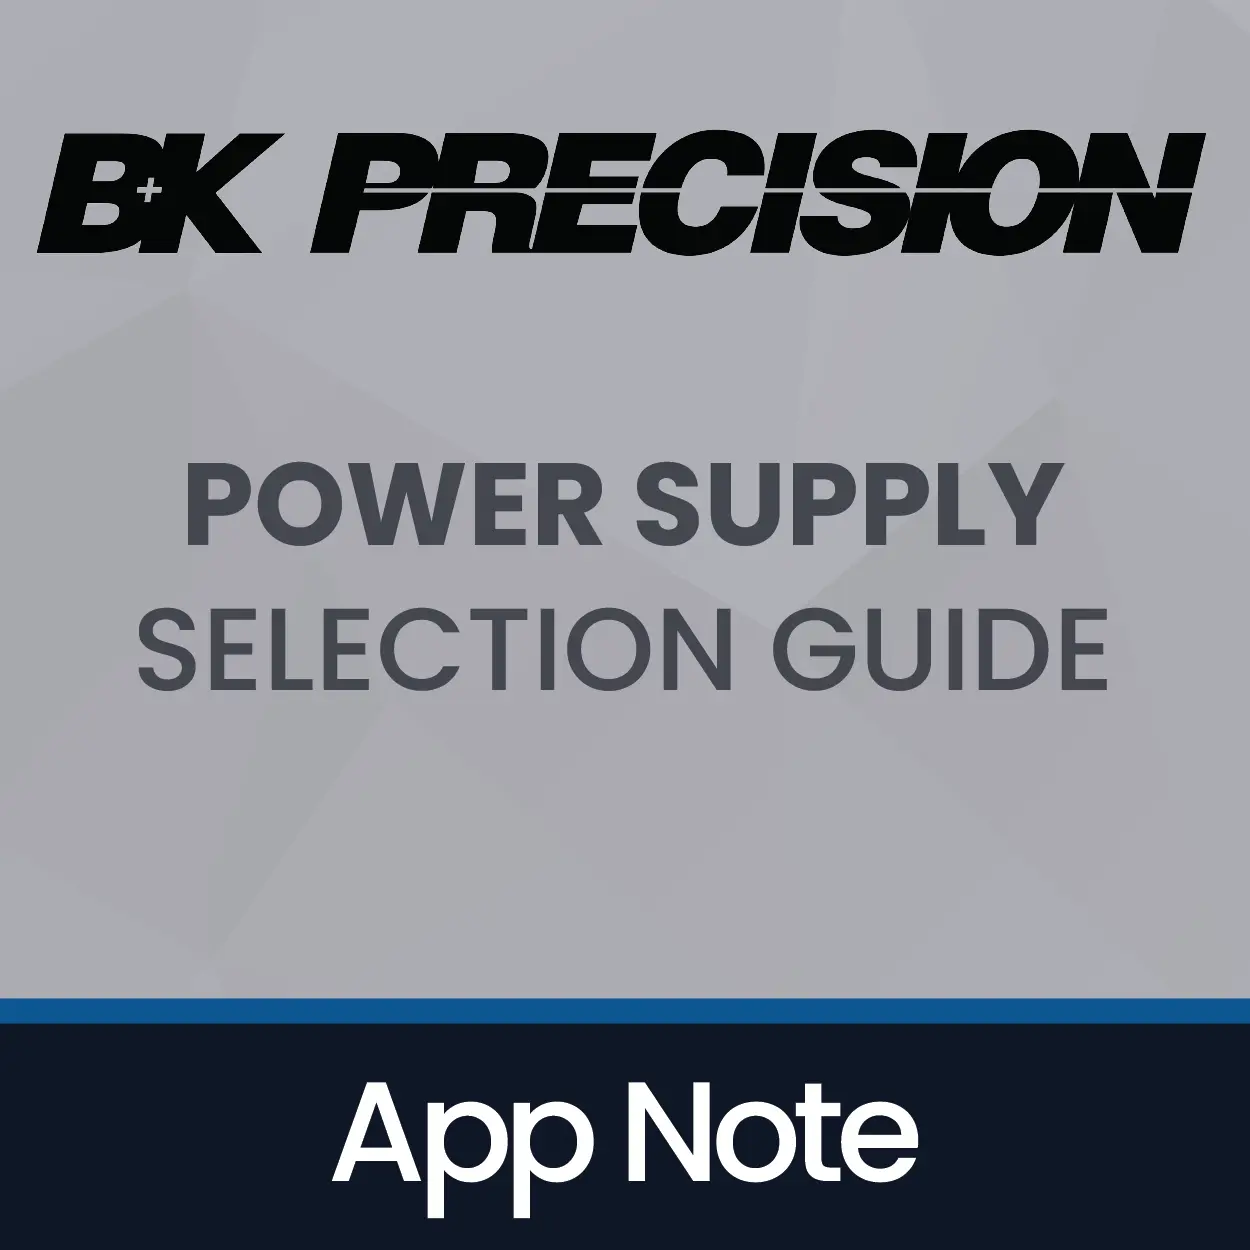 B&K Precision Power Supply Selection Guide